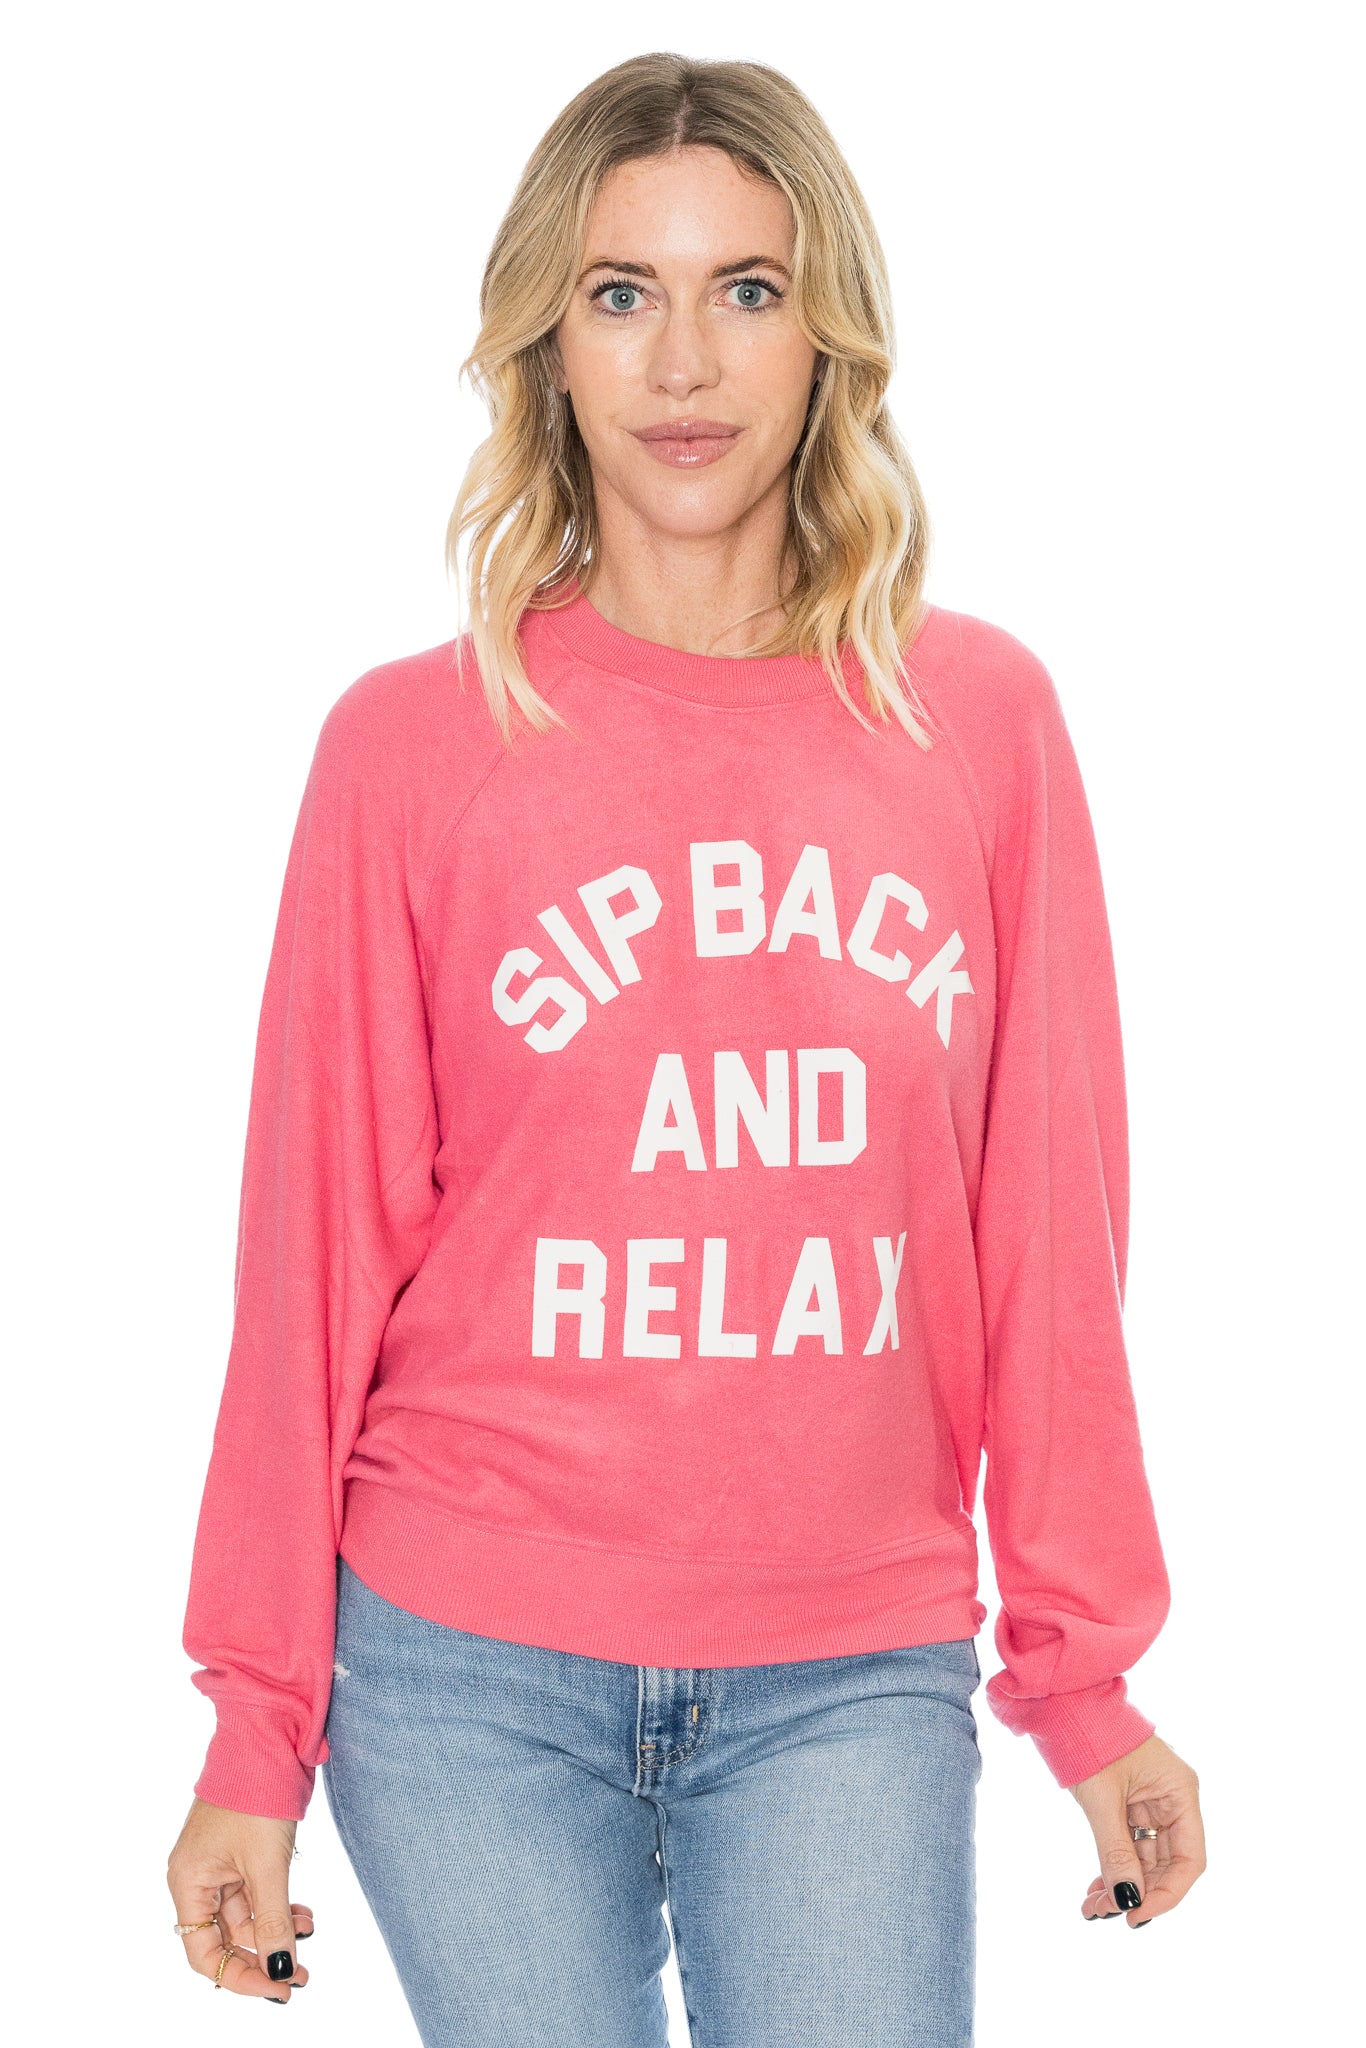 Sip Back and Relax Top